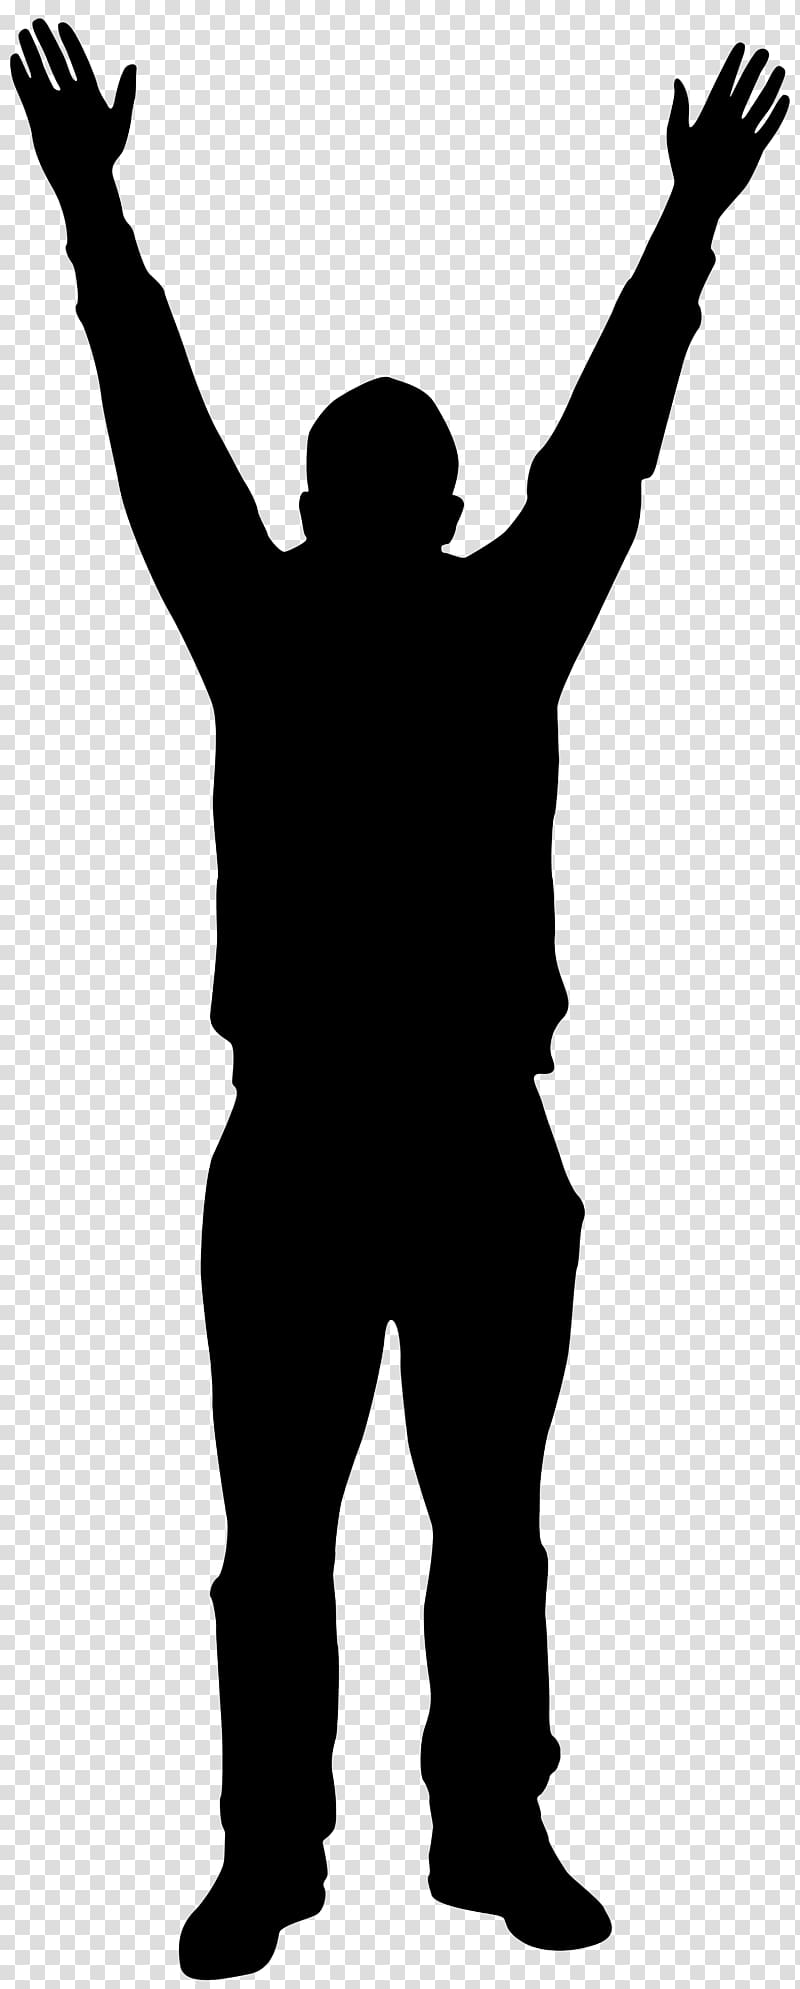 Silhouette Man , Man with Hands up Silhouette transparent background PNG clipart